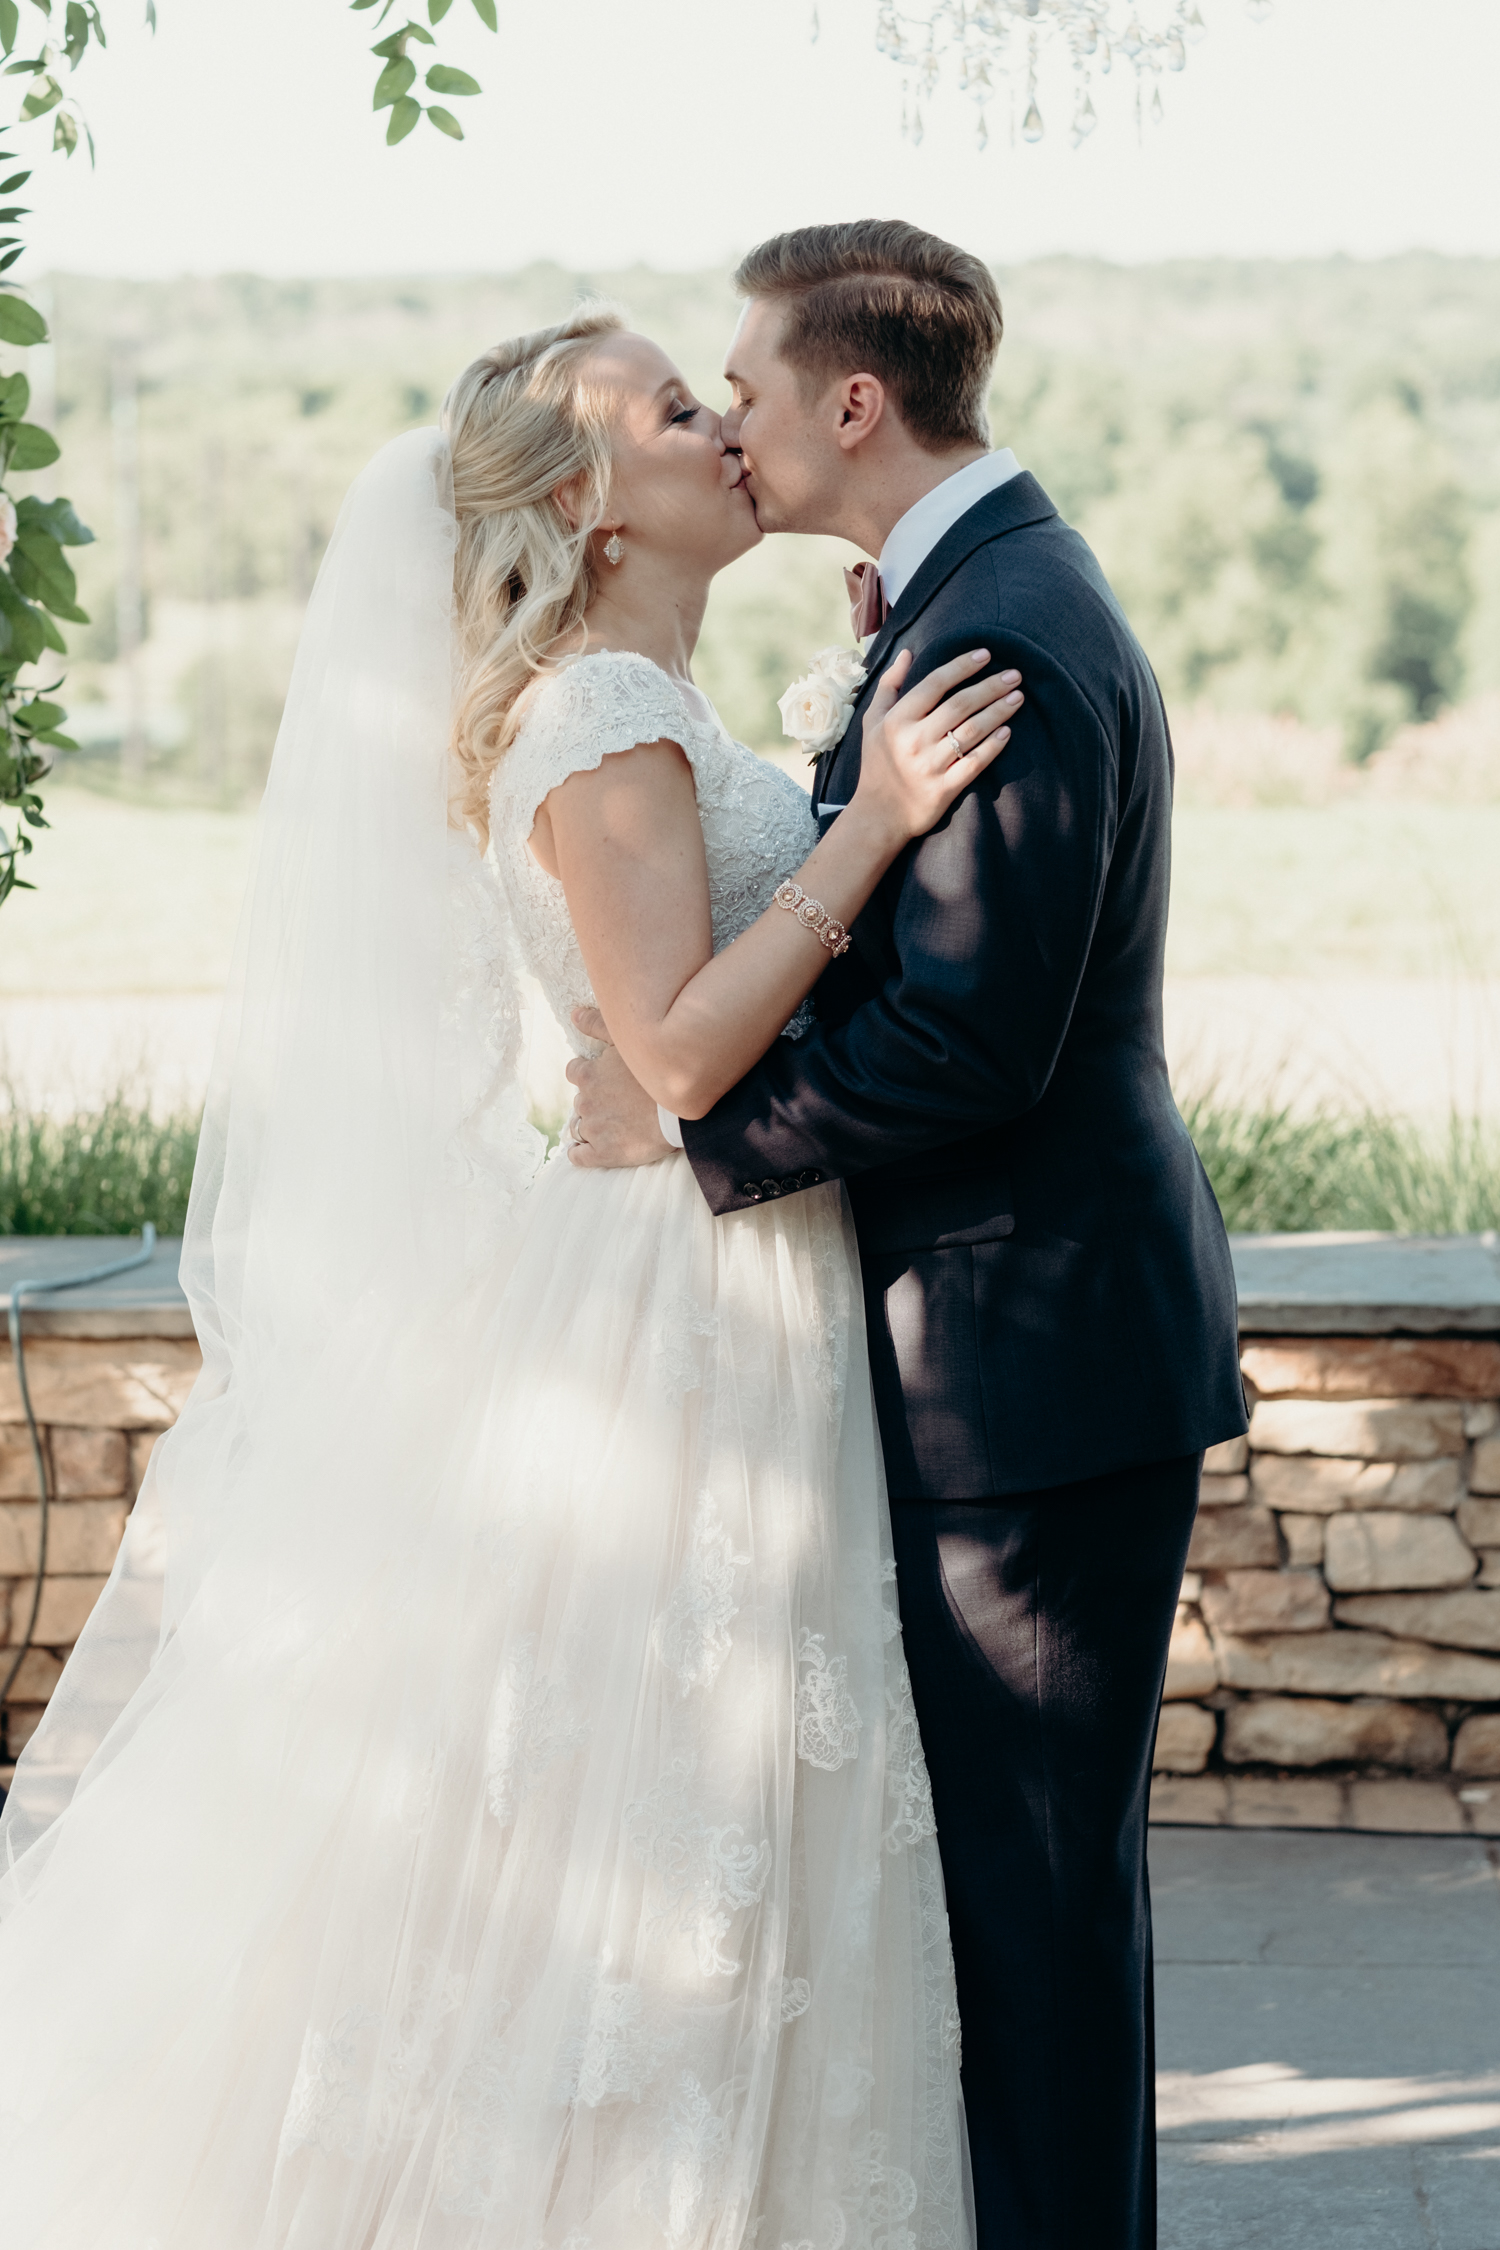 A bride and groom share their first kiss during their outdoor wedding ceremony at Lansdowne Resort.